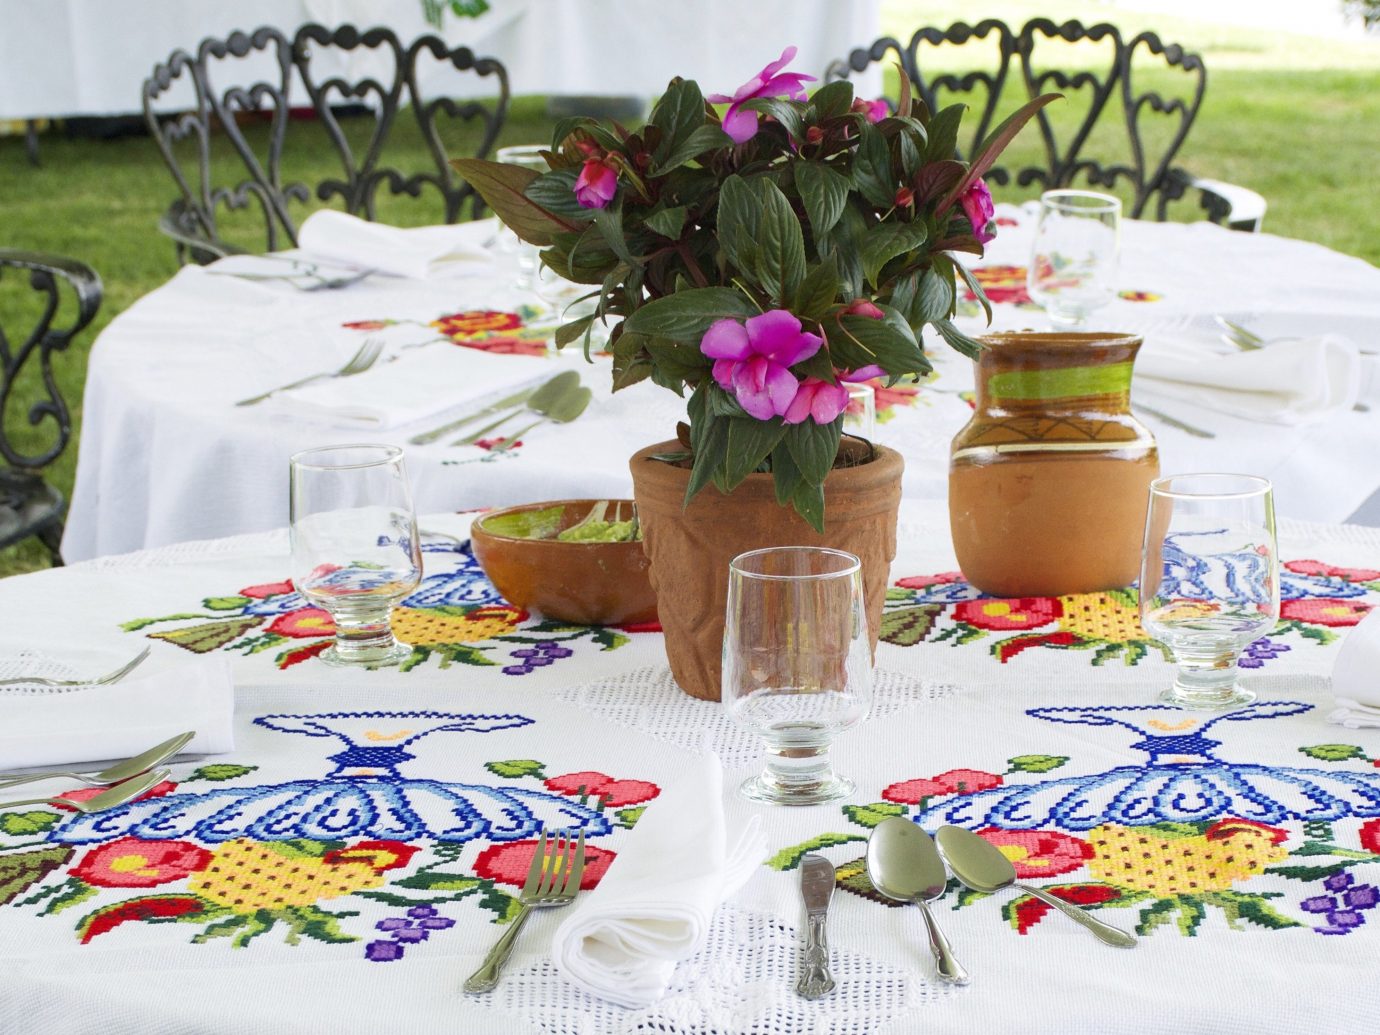 Jetsetter Guides table tablecloth flower flower arranging centrepiece floristry Party floral design event textile meal material set plant dining table